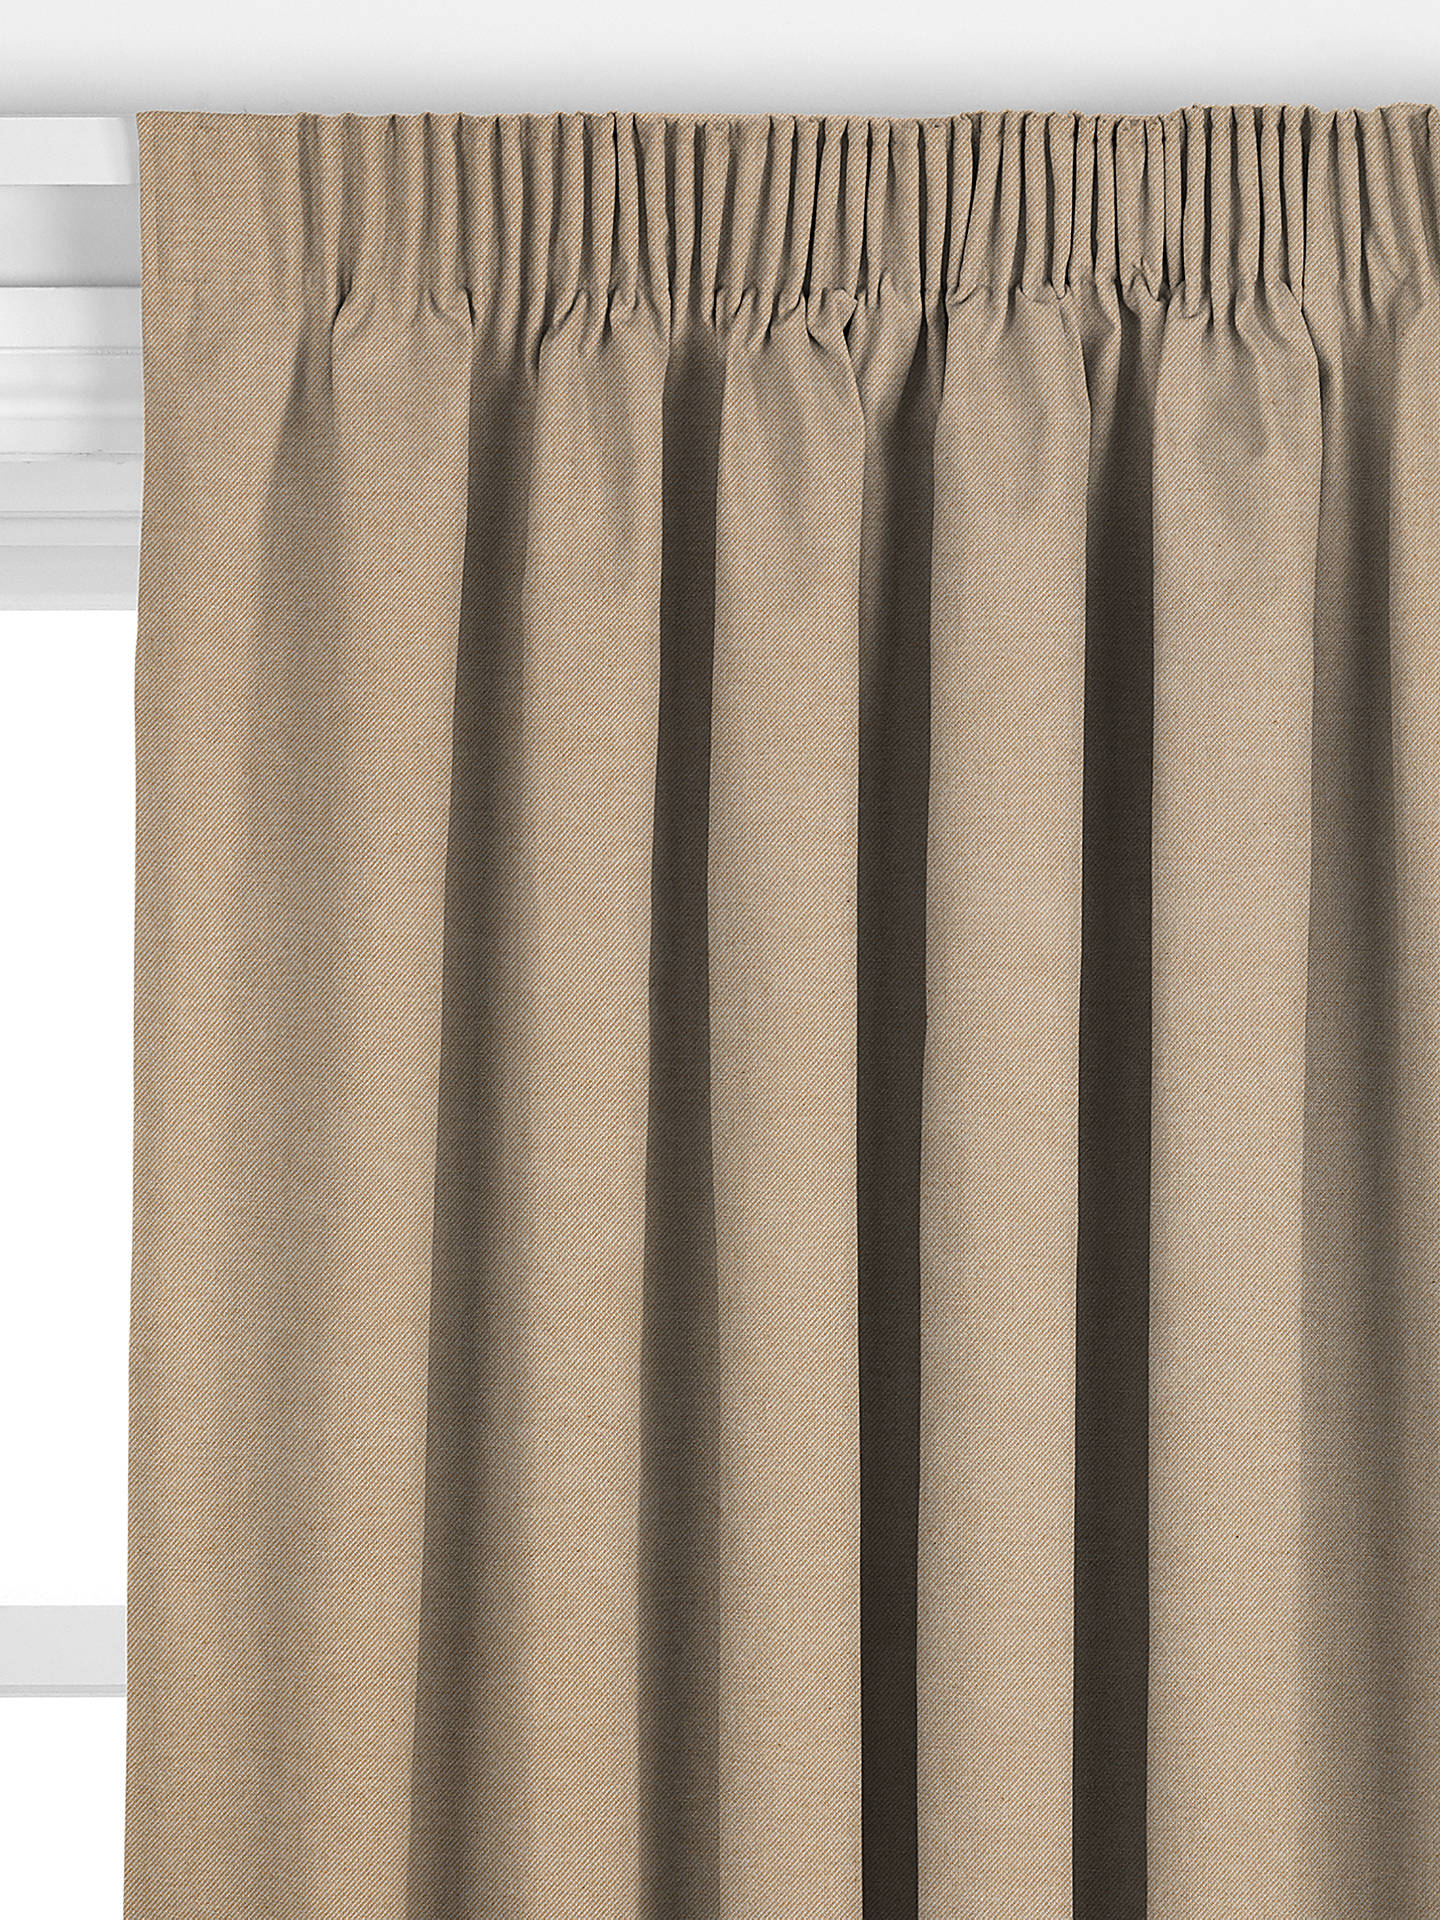 John Lewis Cotton Twill Made to Measure Curtains, Natural